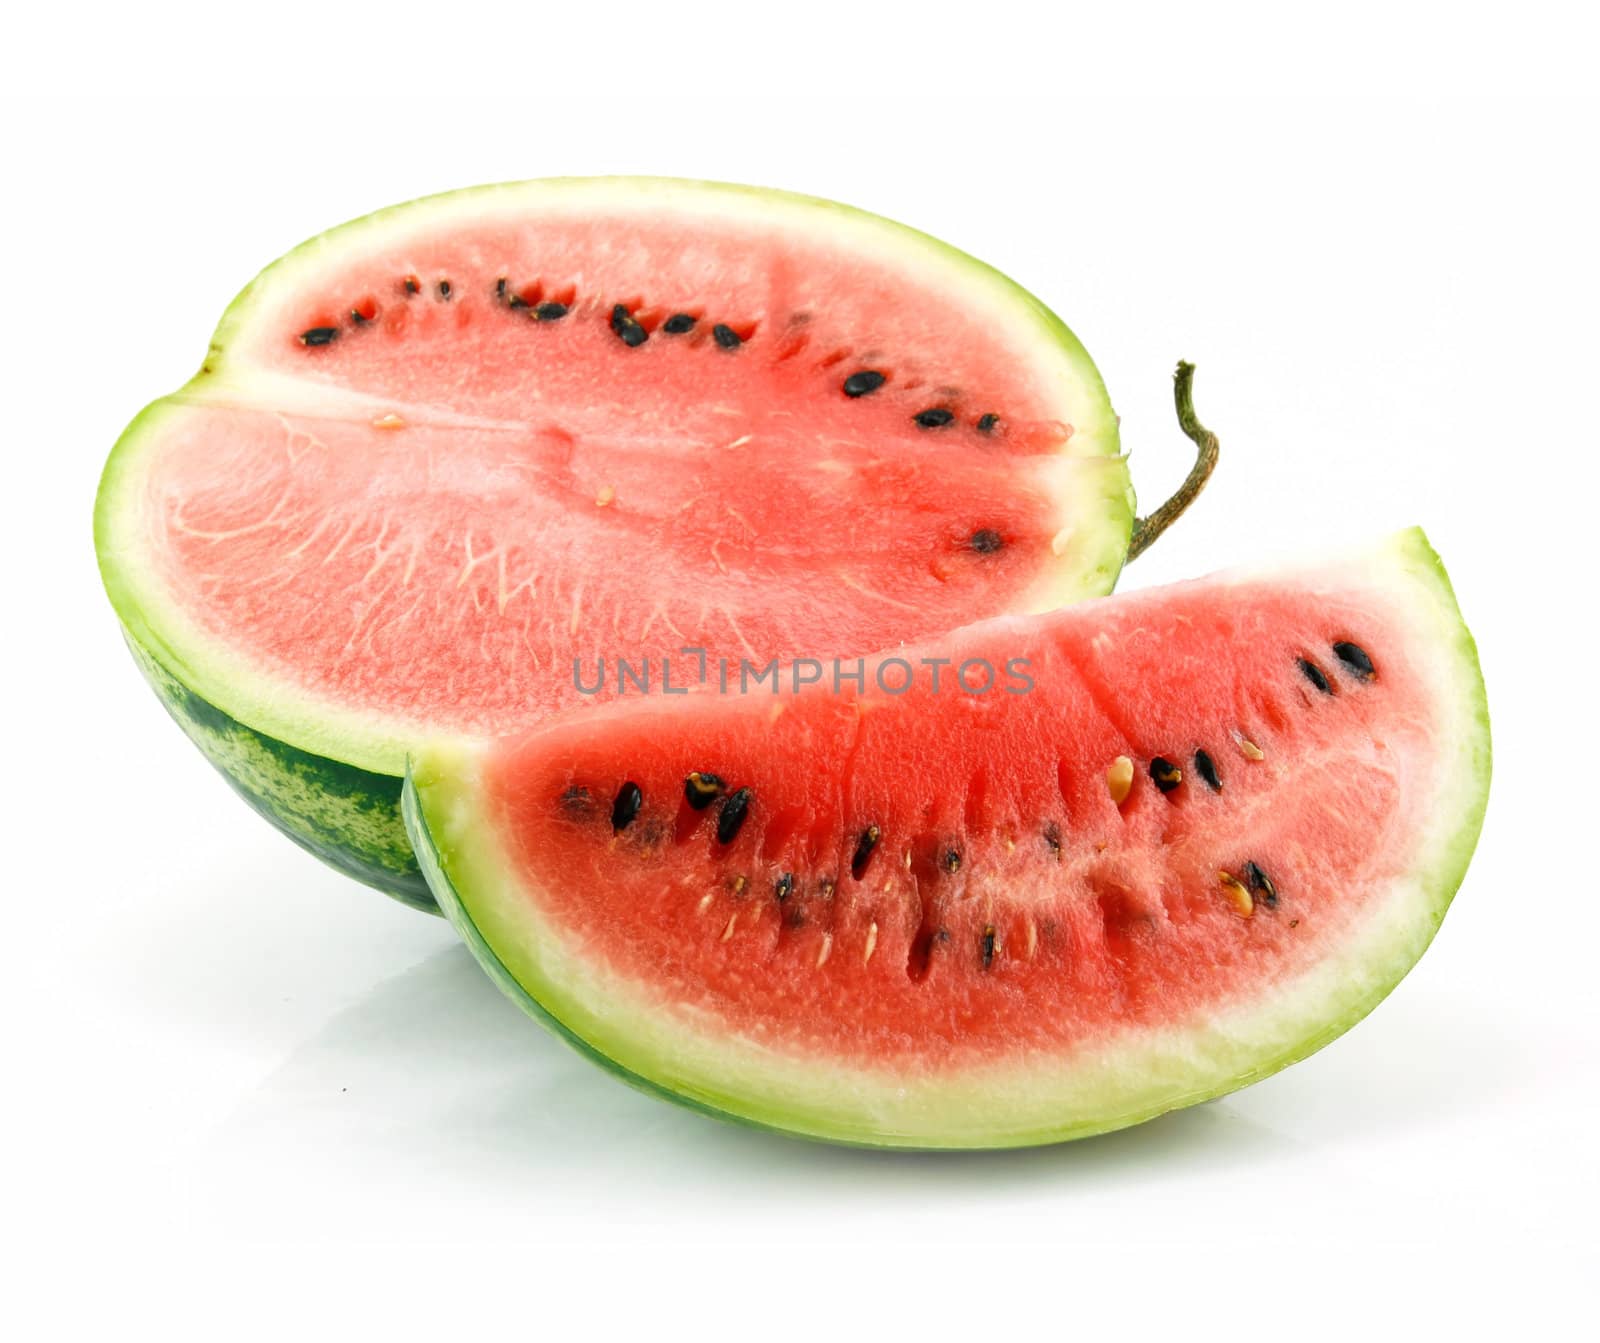 Half and Section of Ripe Sliced Green Watermelon Isolated on White Background